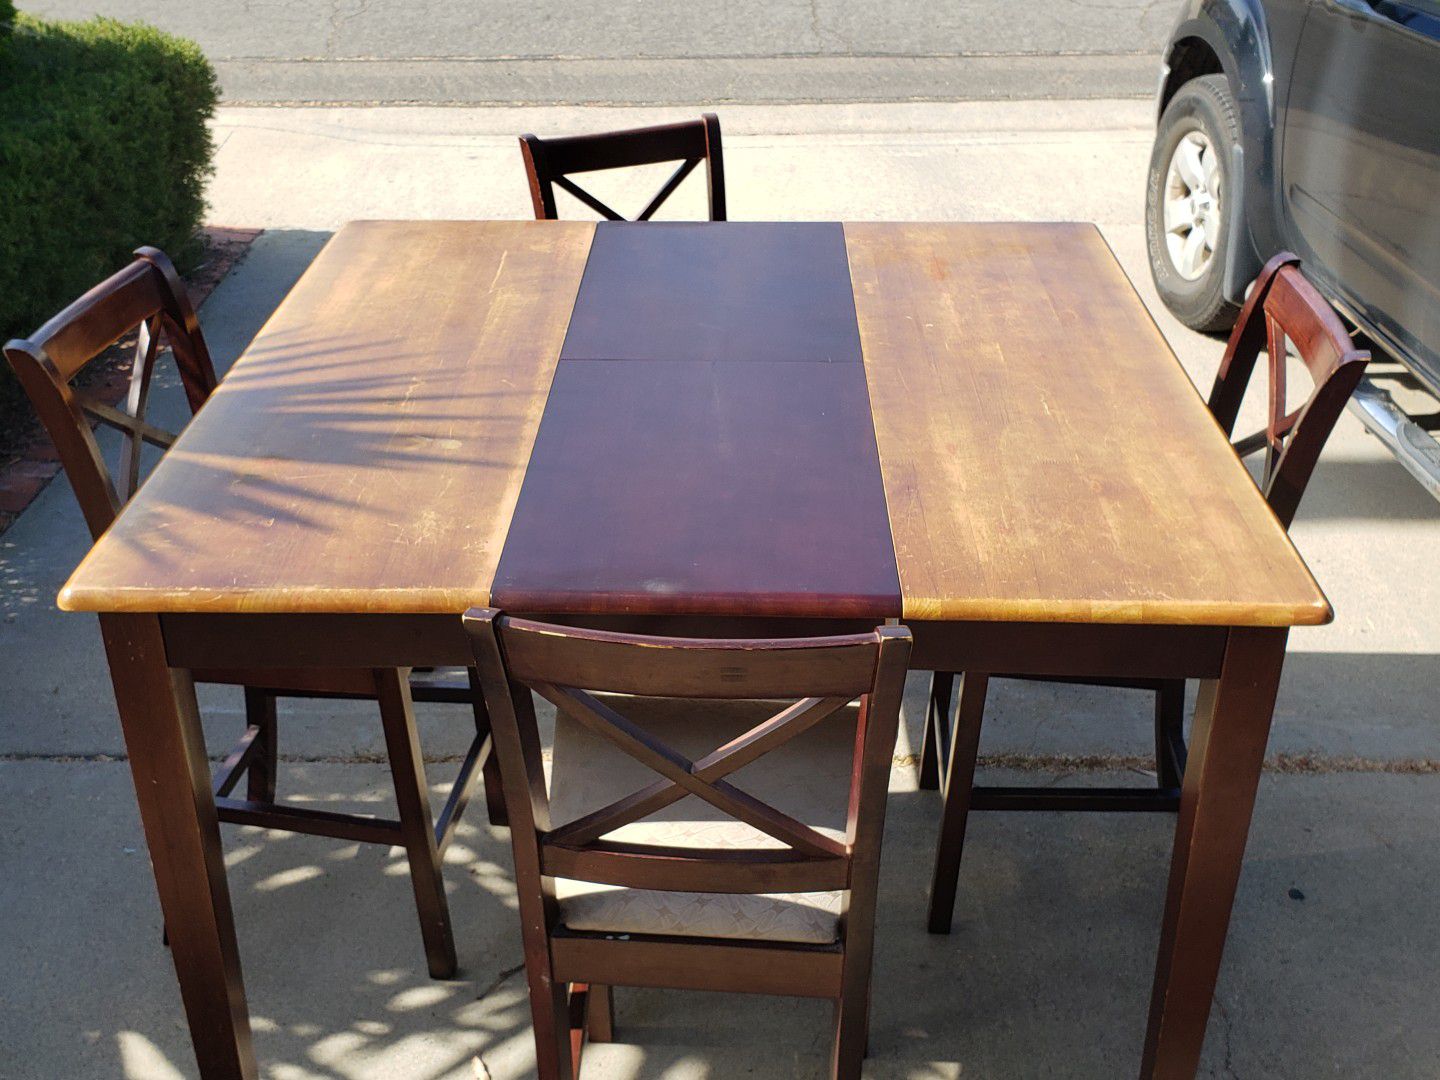 Large, tall table with 4 tall chairs